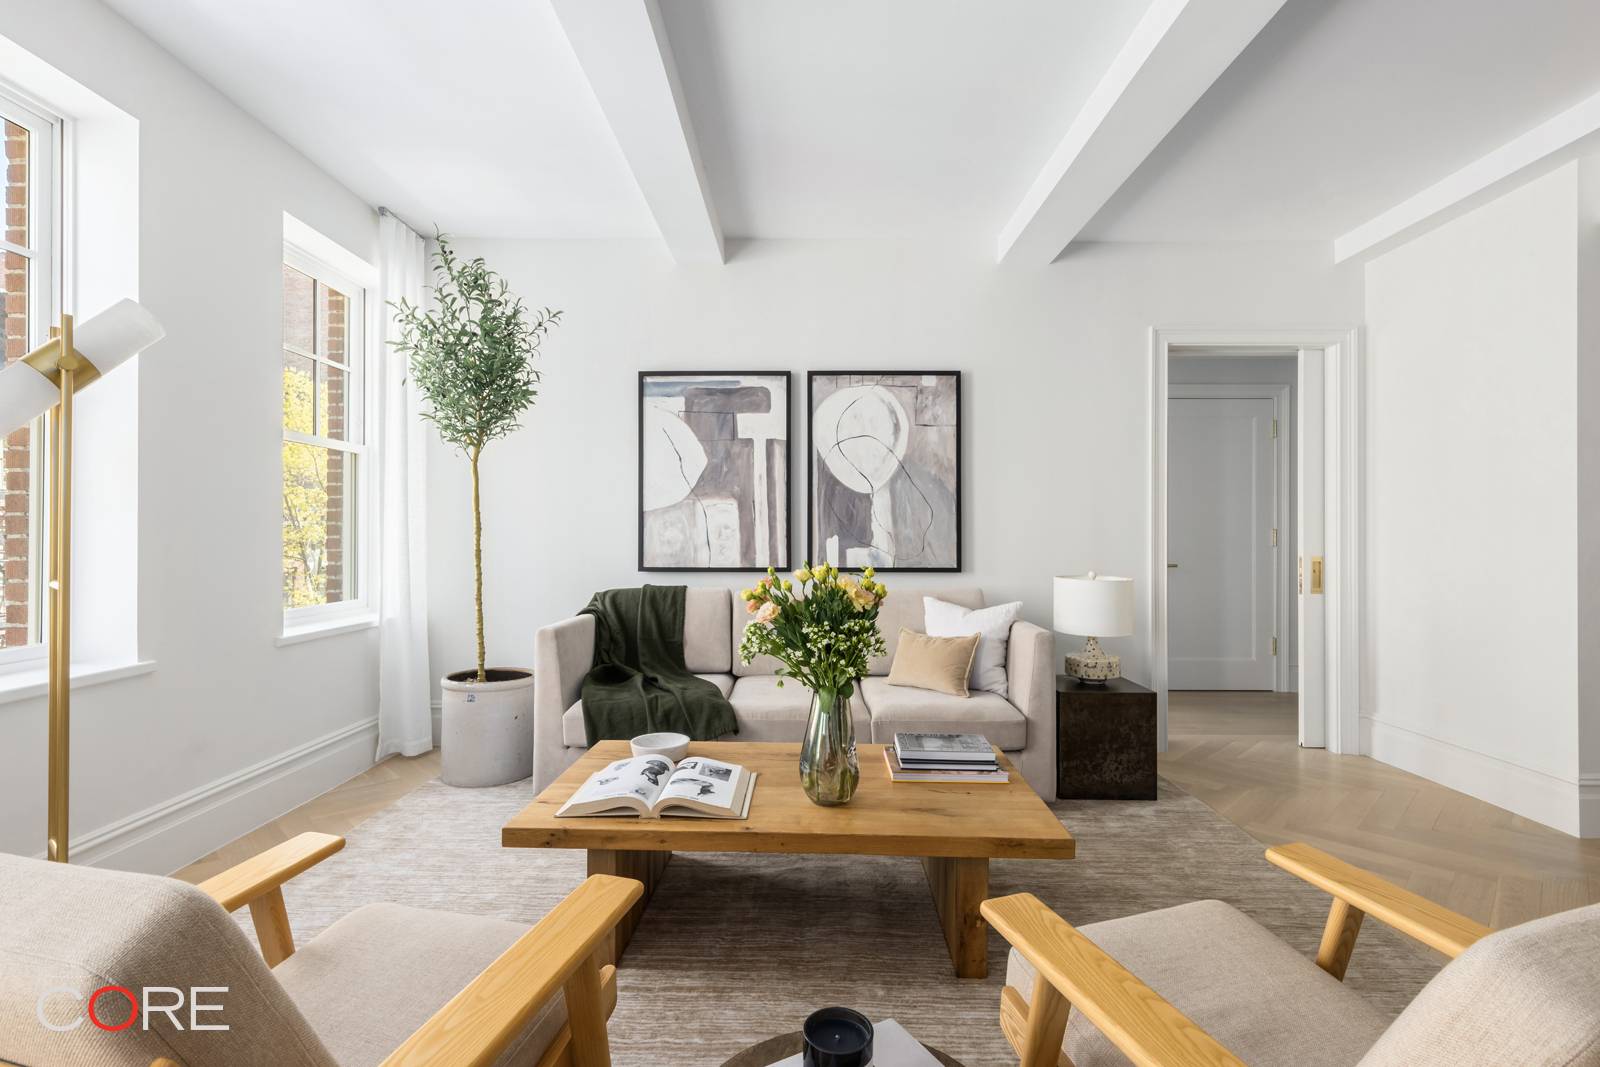 Immediate Occupancy Introducing the Marlow located in the heart of the Upper West Side, nestled among the neighborhood s signature brownstones, this 10 story, prewar building presents 27 luxurious, contemporary ...